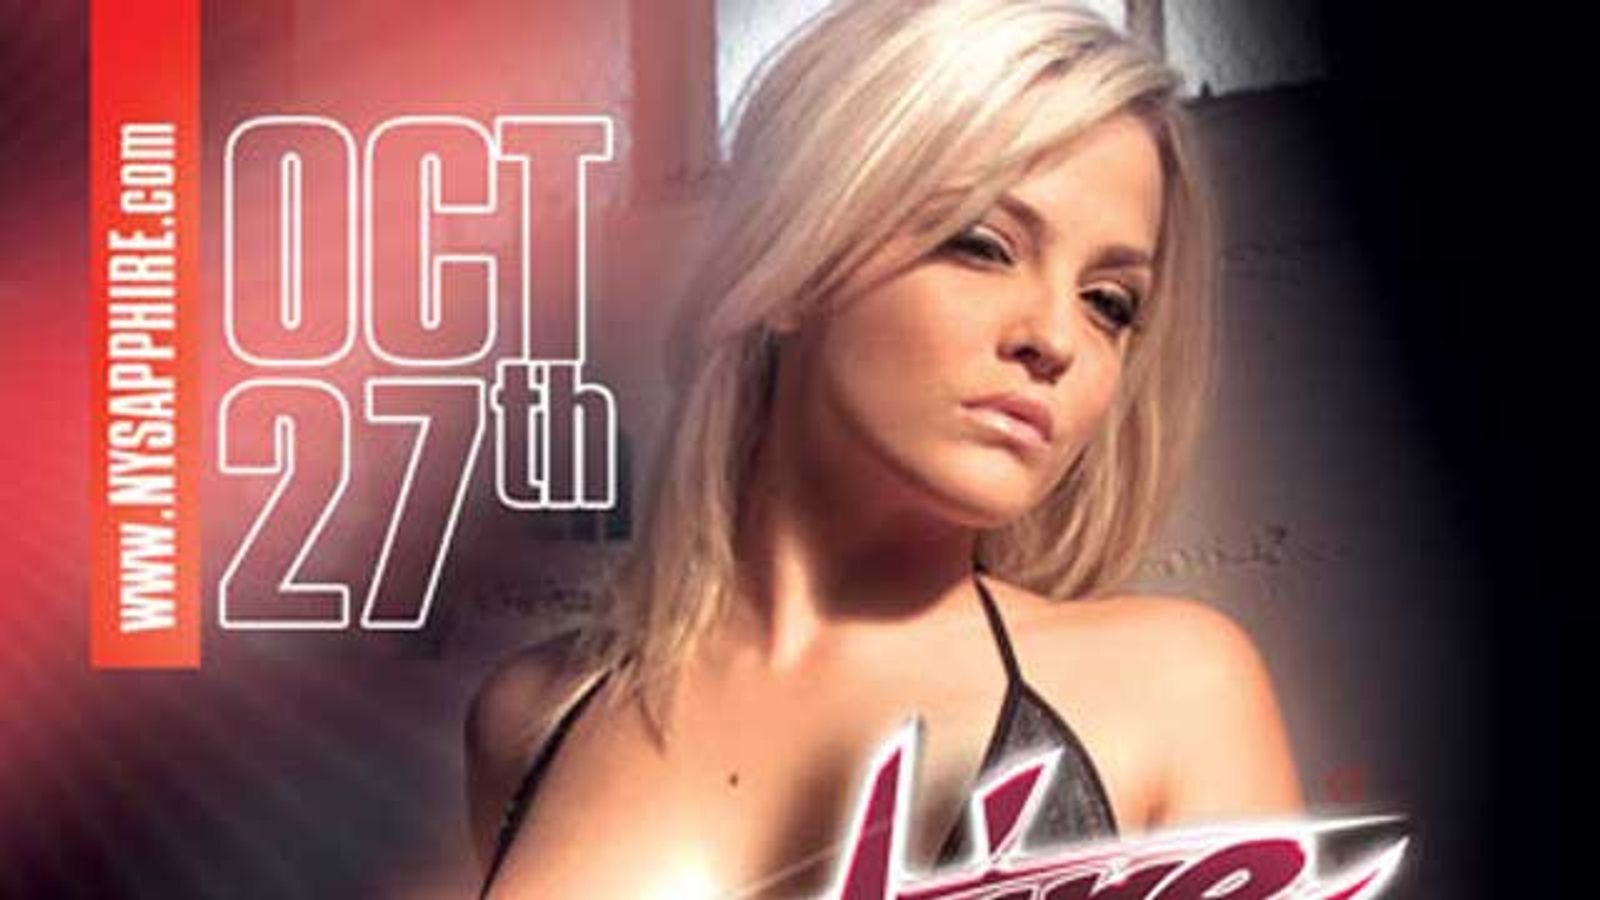 Adam & Eve Contract Star Alexis Texas Brings Her Booty to the Big Apple